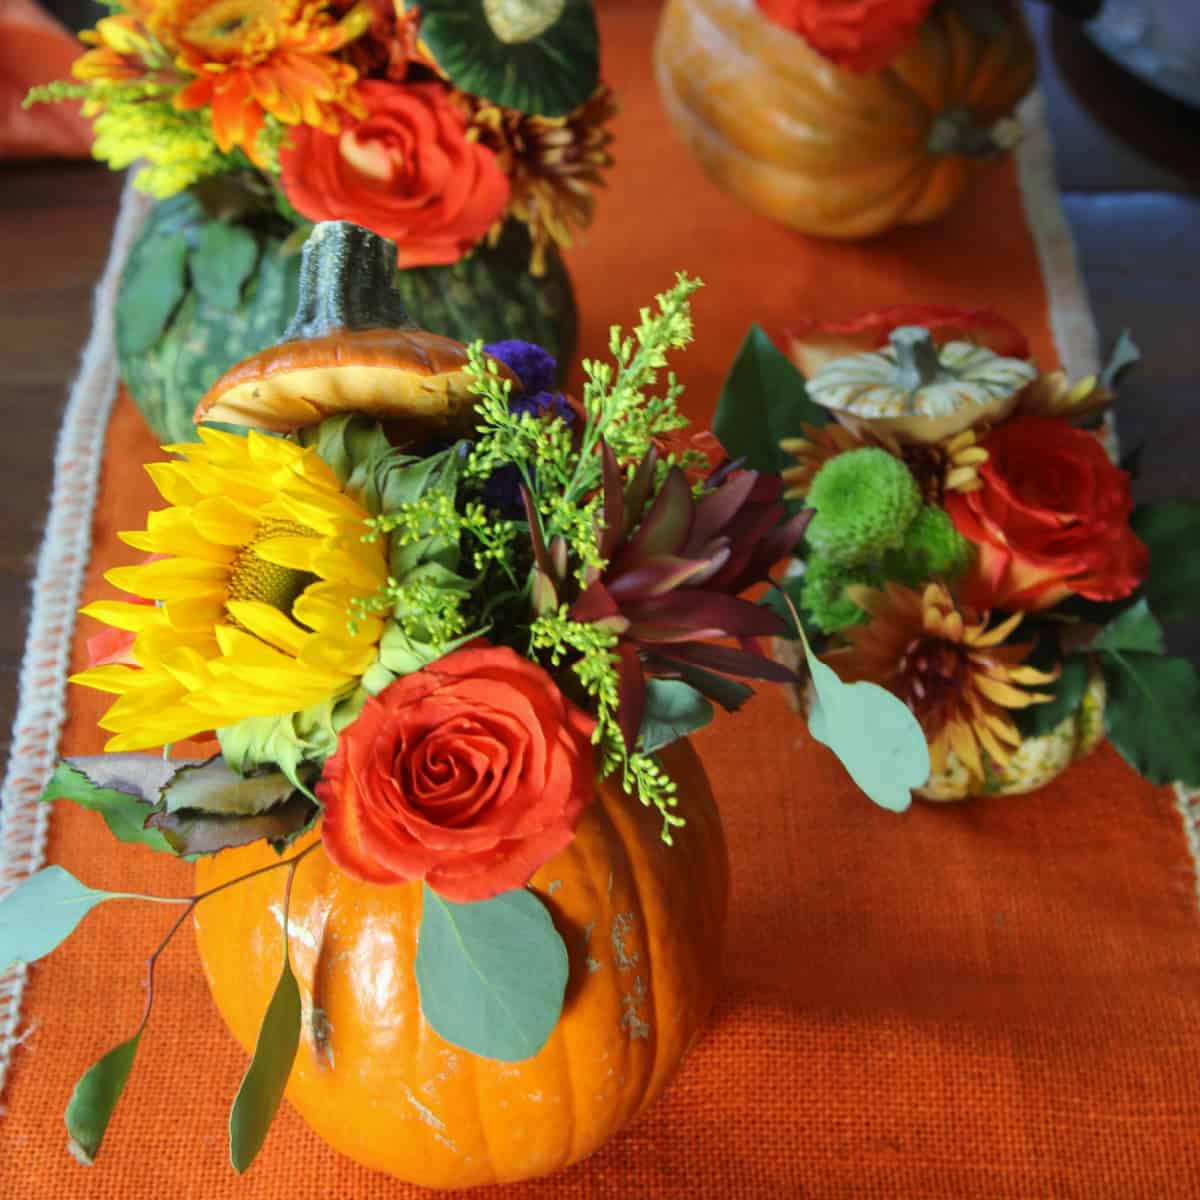 An orange table runner with handmade orange pumpkins filled with fresh Fall flowers and greenery for Thanksgiving centerpieces.